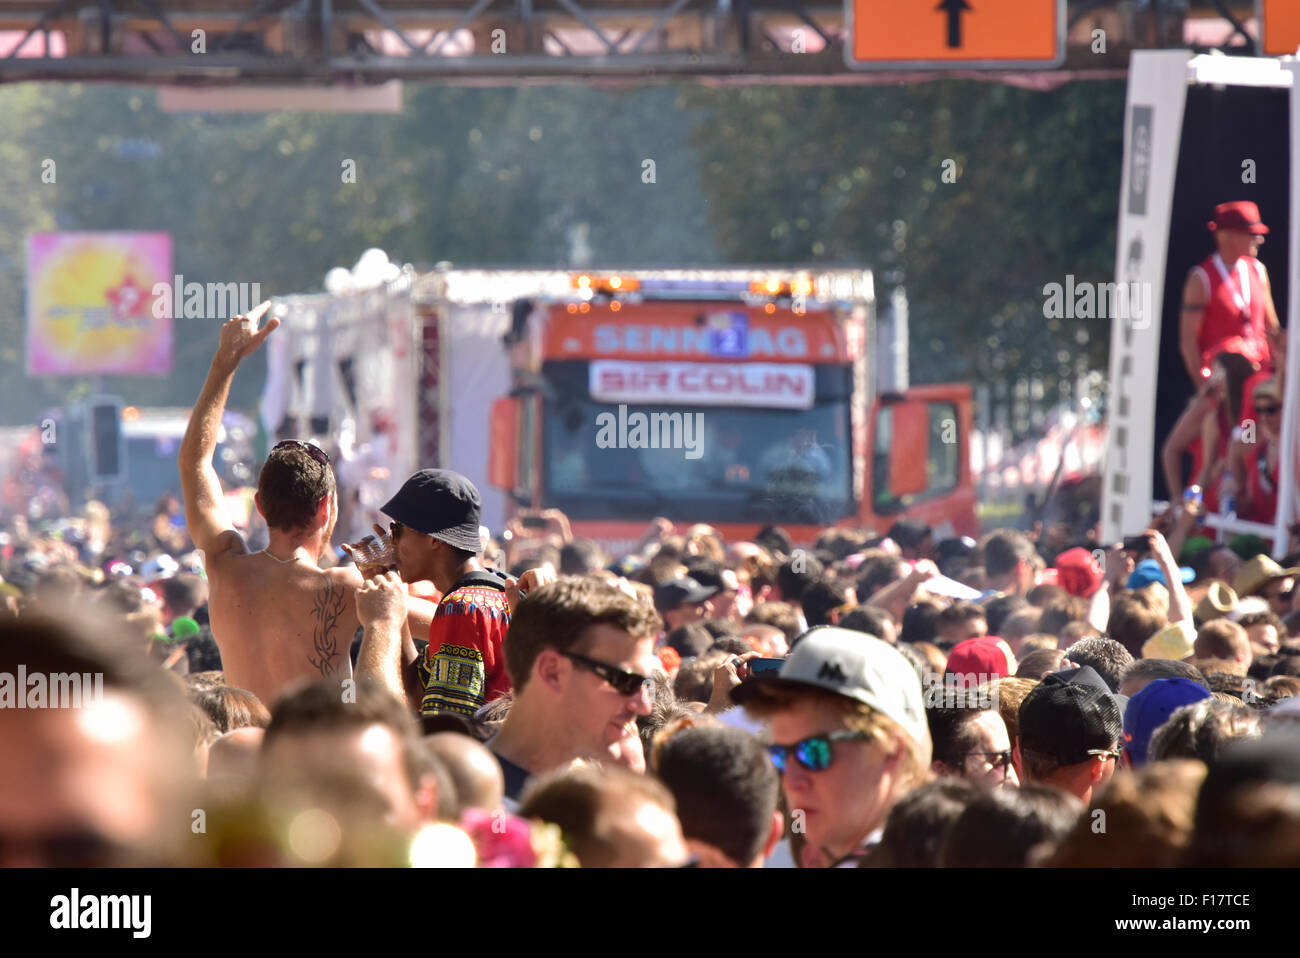 Zurich, Switzerland. 29th Aug, 2015. A million people dance and party at Zurich Streetparade while the parade of 26 love mobiles slowly passes by. Zurich's Streetparade is one of the world's largest techno music event. Credit:  Erik Tham/Alamy Live News Stock Photo